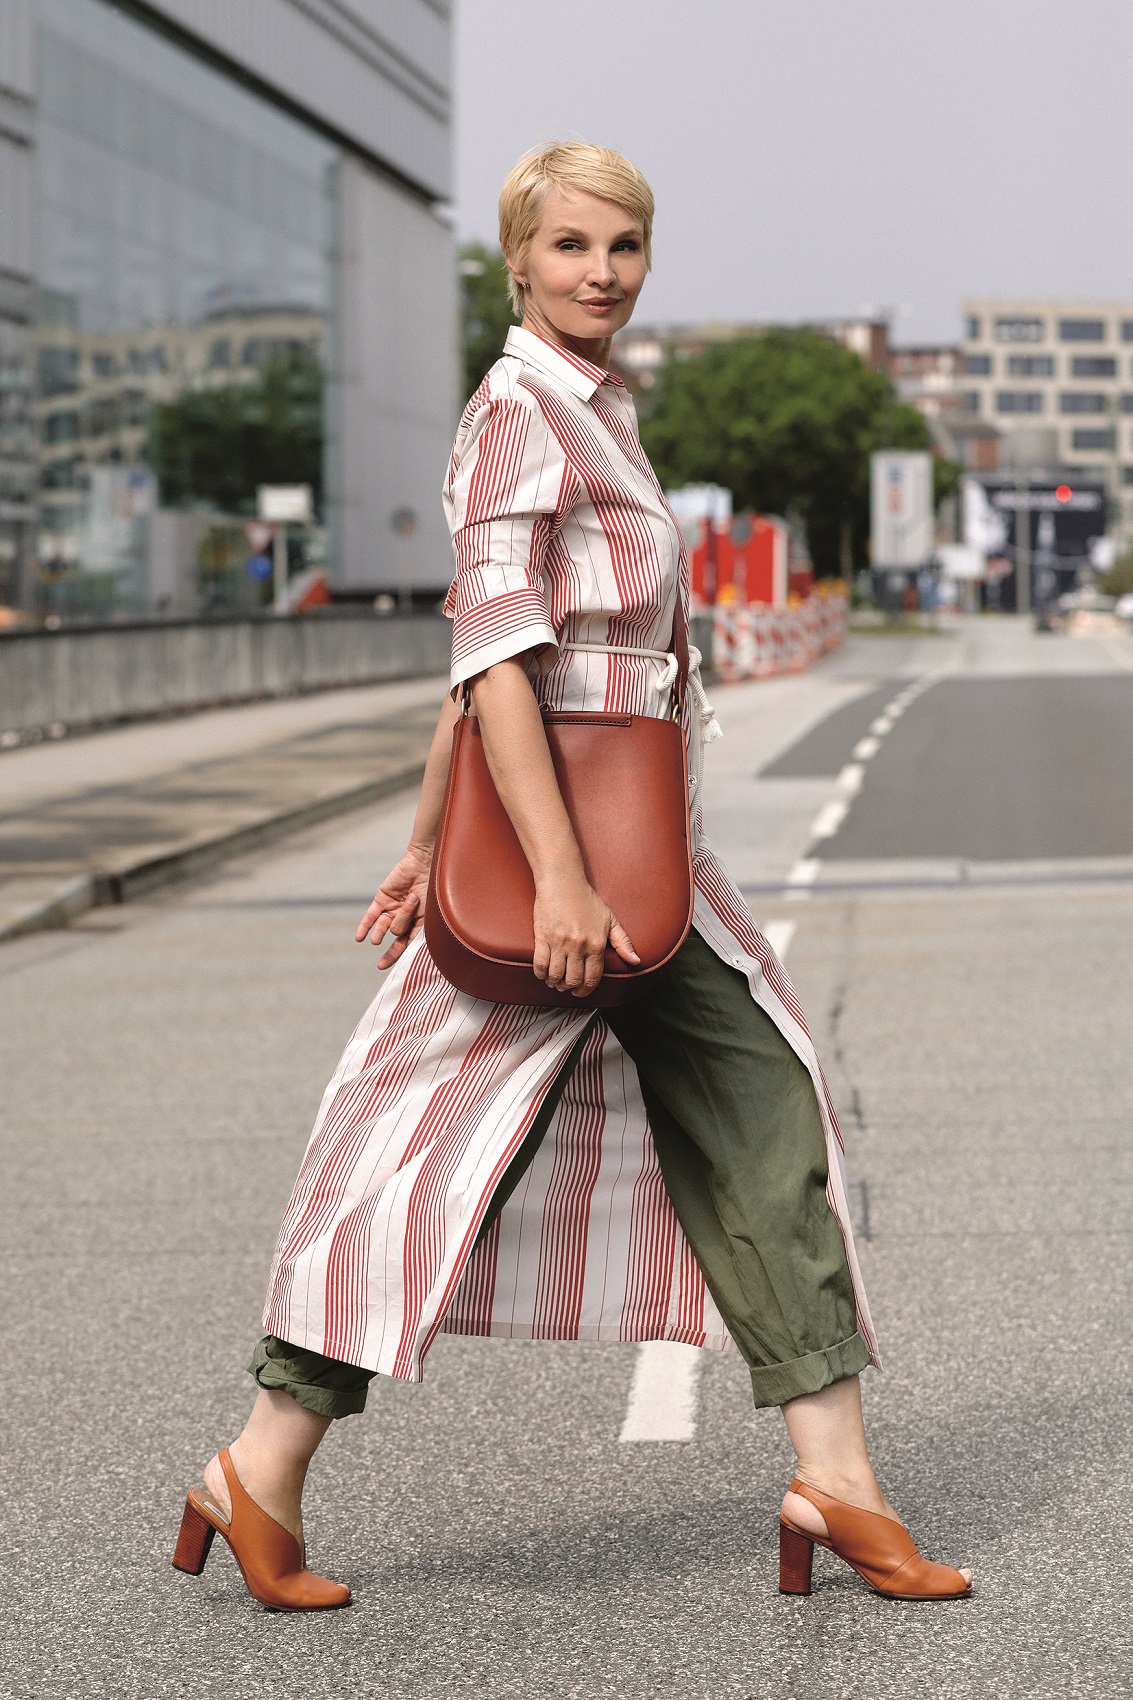 HAMBURG, GERMANY - JULY 06: German presenter Susann Atwell wearing a brown bag by Stiebich & Rieth, brown sandals by Closed, olive green pants and a long red and white blouse by Odeeh during a street style shooting on July 6, 2020 in Hamburg, Germany. (Photo by Streetstyleshooters/Getty Images)